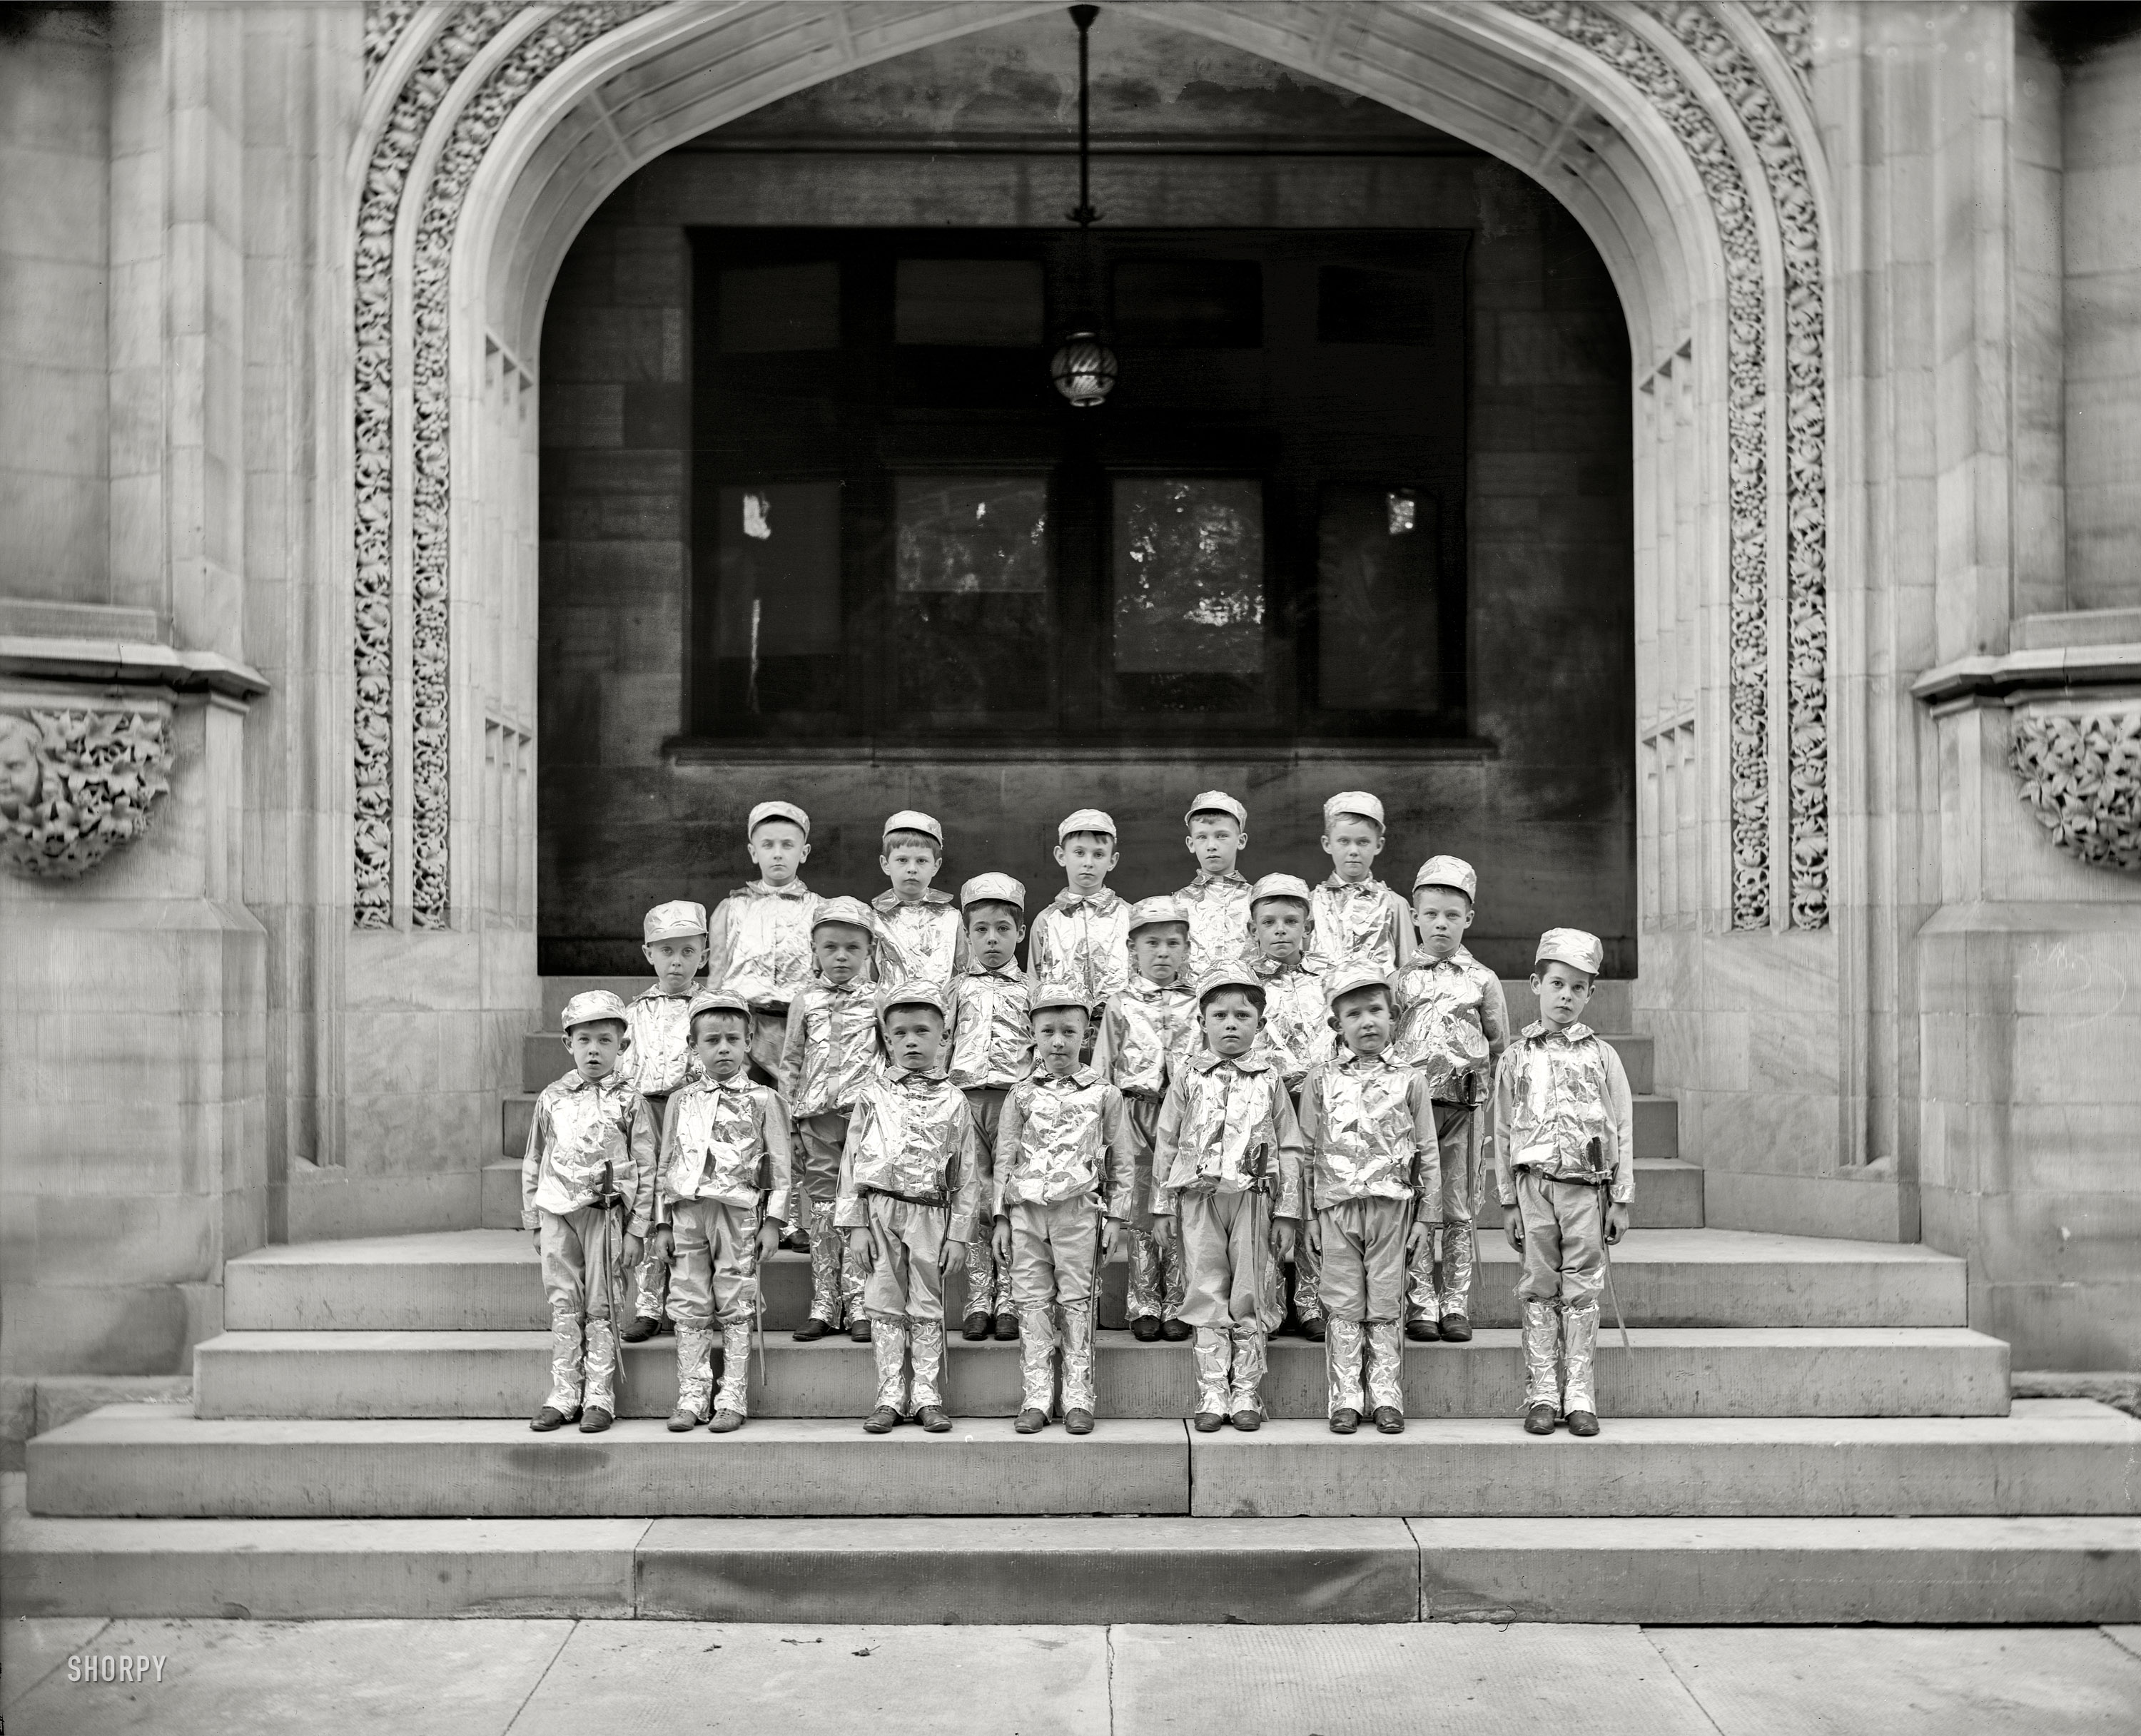 Circa 1905. Anyplace, USA. "Schoolboys." In spiffy foil uniforms. 8x10 inch dry plate glass negative, Detroit Publishing Company. View full size.
UPDATE: This is the Saints Peter and Paul Academy, 64 Parsons St., Detroit. 